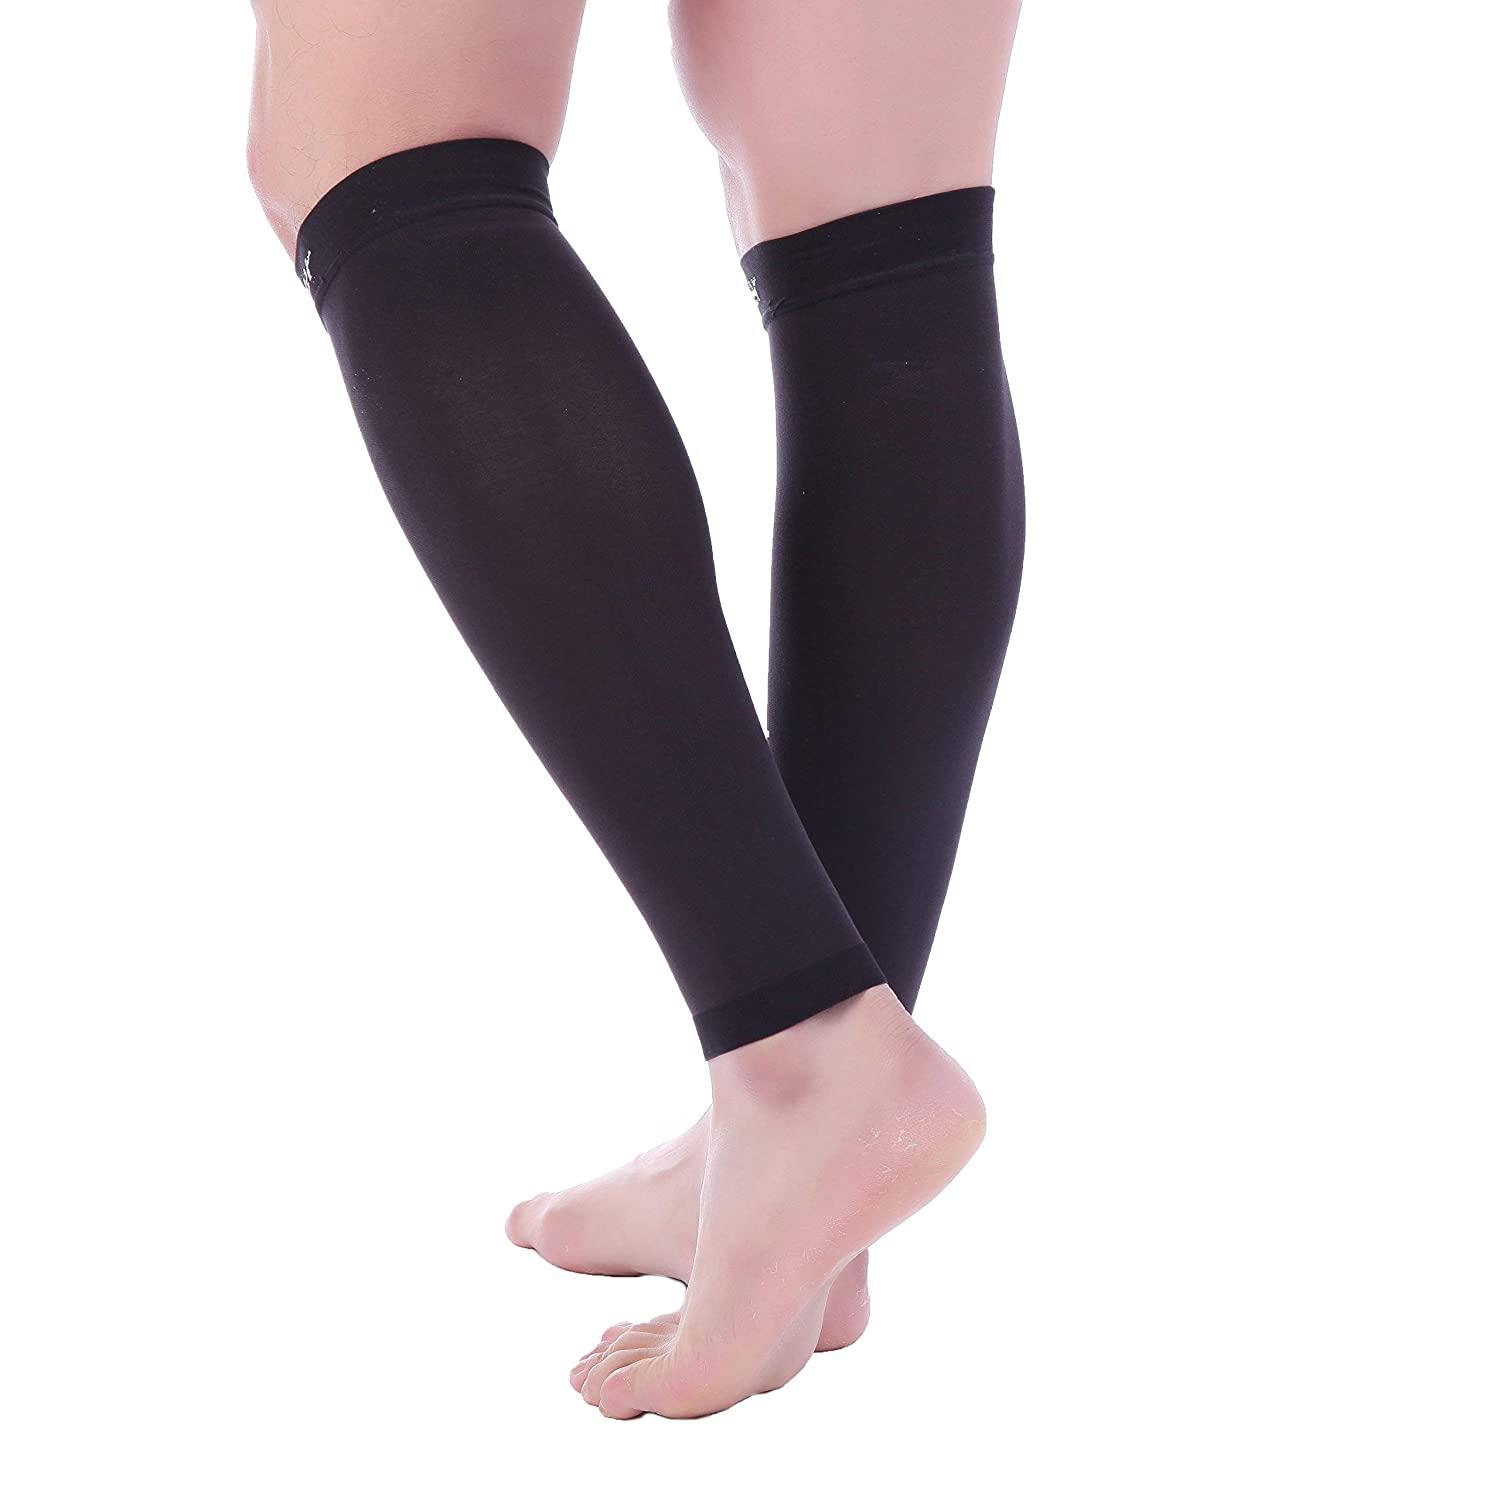 GetUSCart- BSERA Calf Compression Sleeve Women, 2 Pairs 20-30mmHg Footless Compression  Socks Stockings for Calf Support, Circulation, Swelling, Shin Splints, Varicose  Veins, Recovery